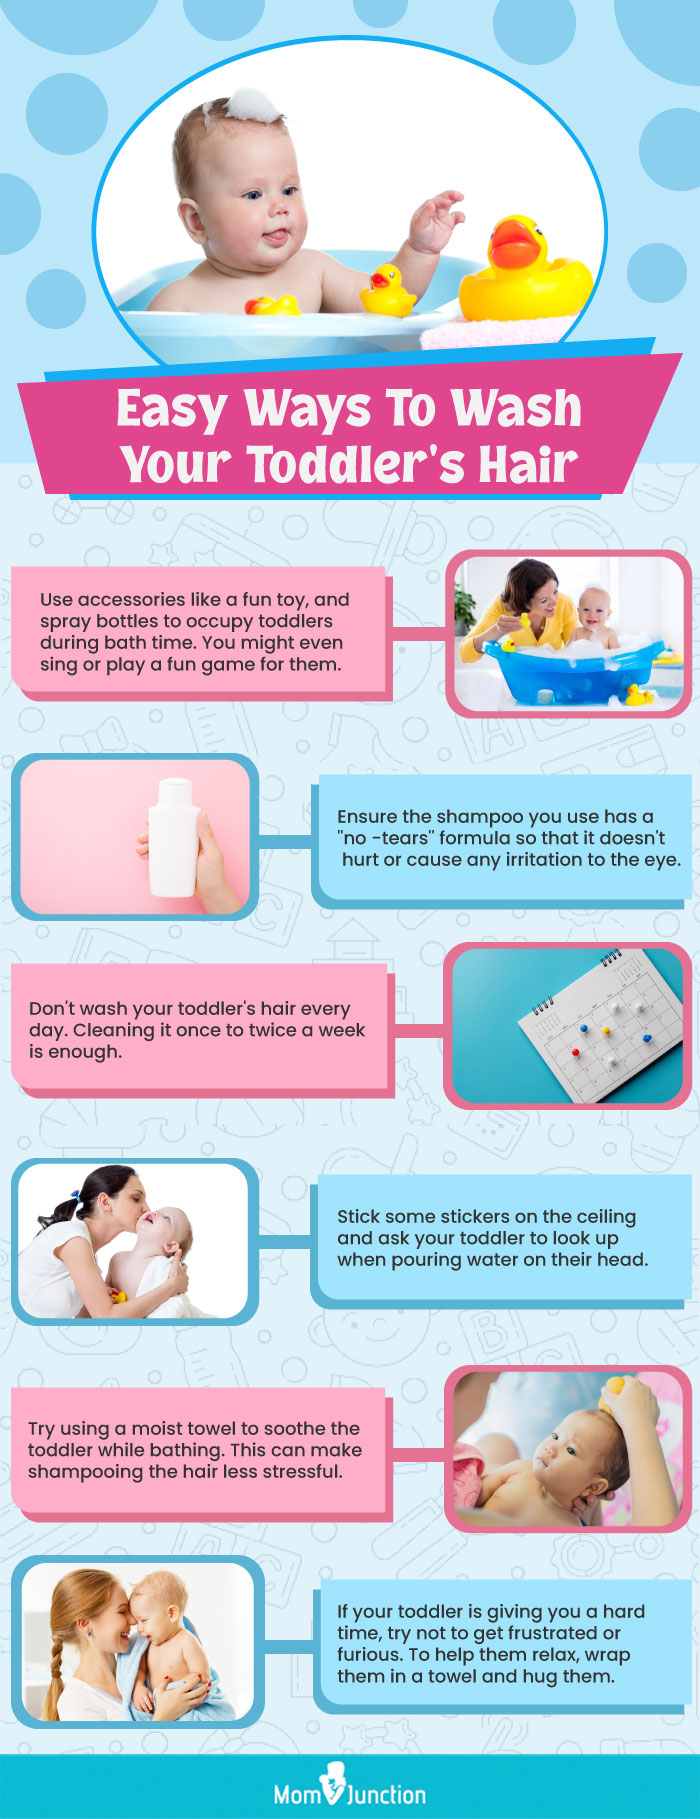 easy ways to wash your toddlers hair (infographic)